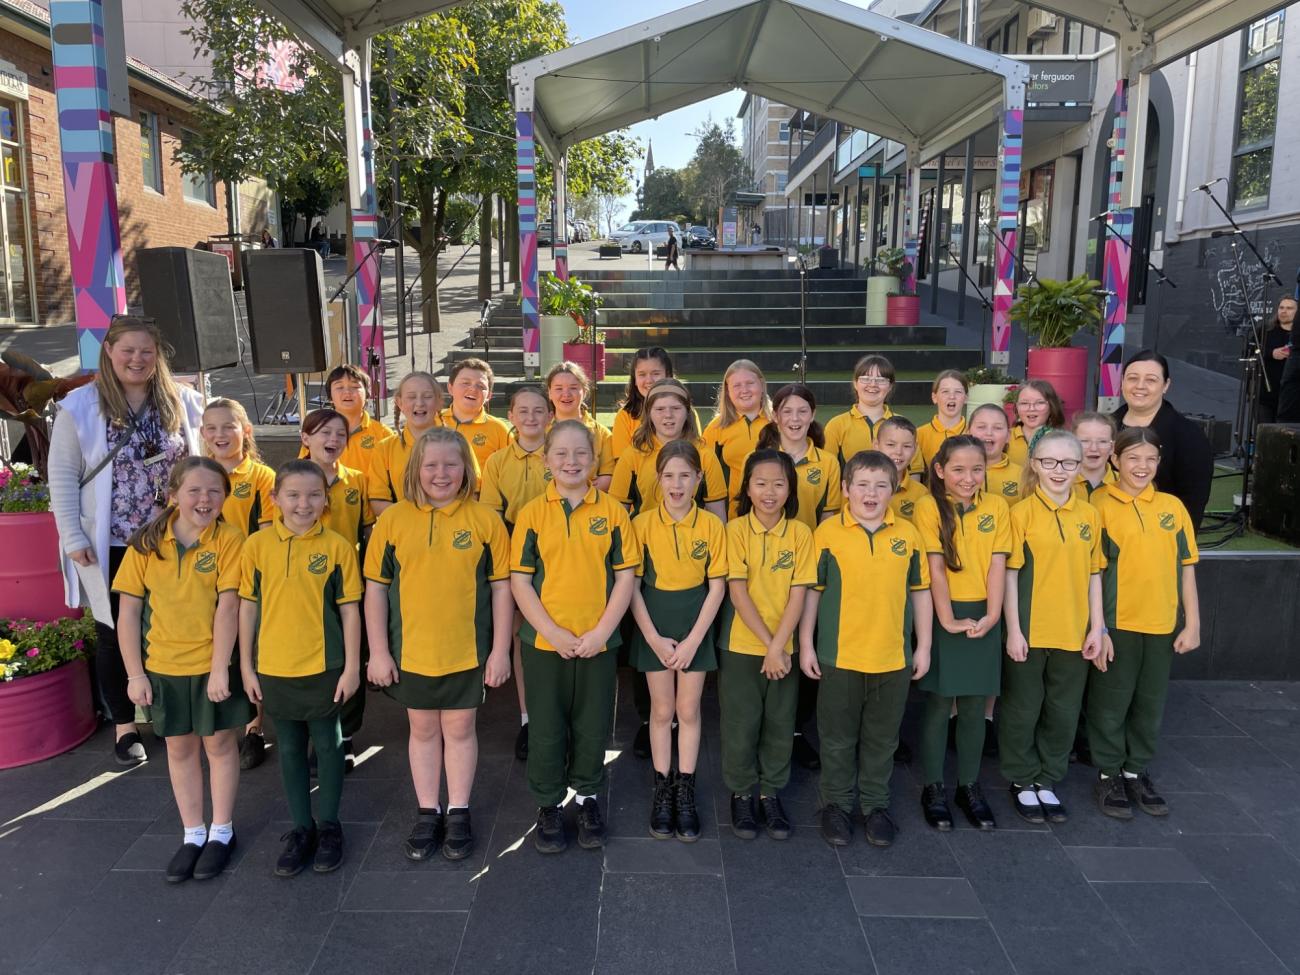 Warilla Public School Choir standing in front of the stage in school uniform for photo